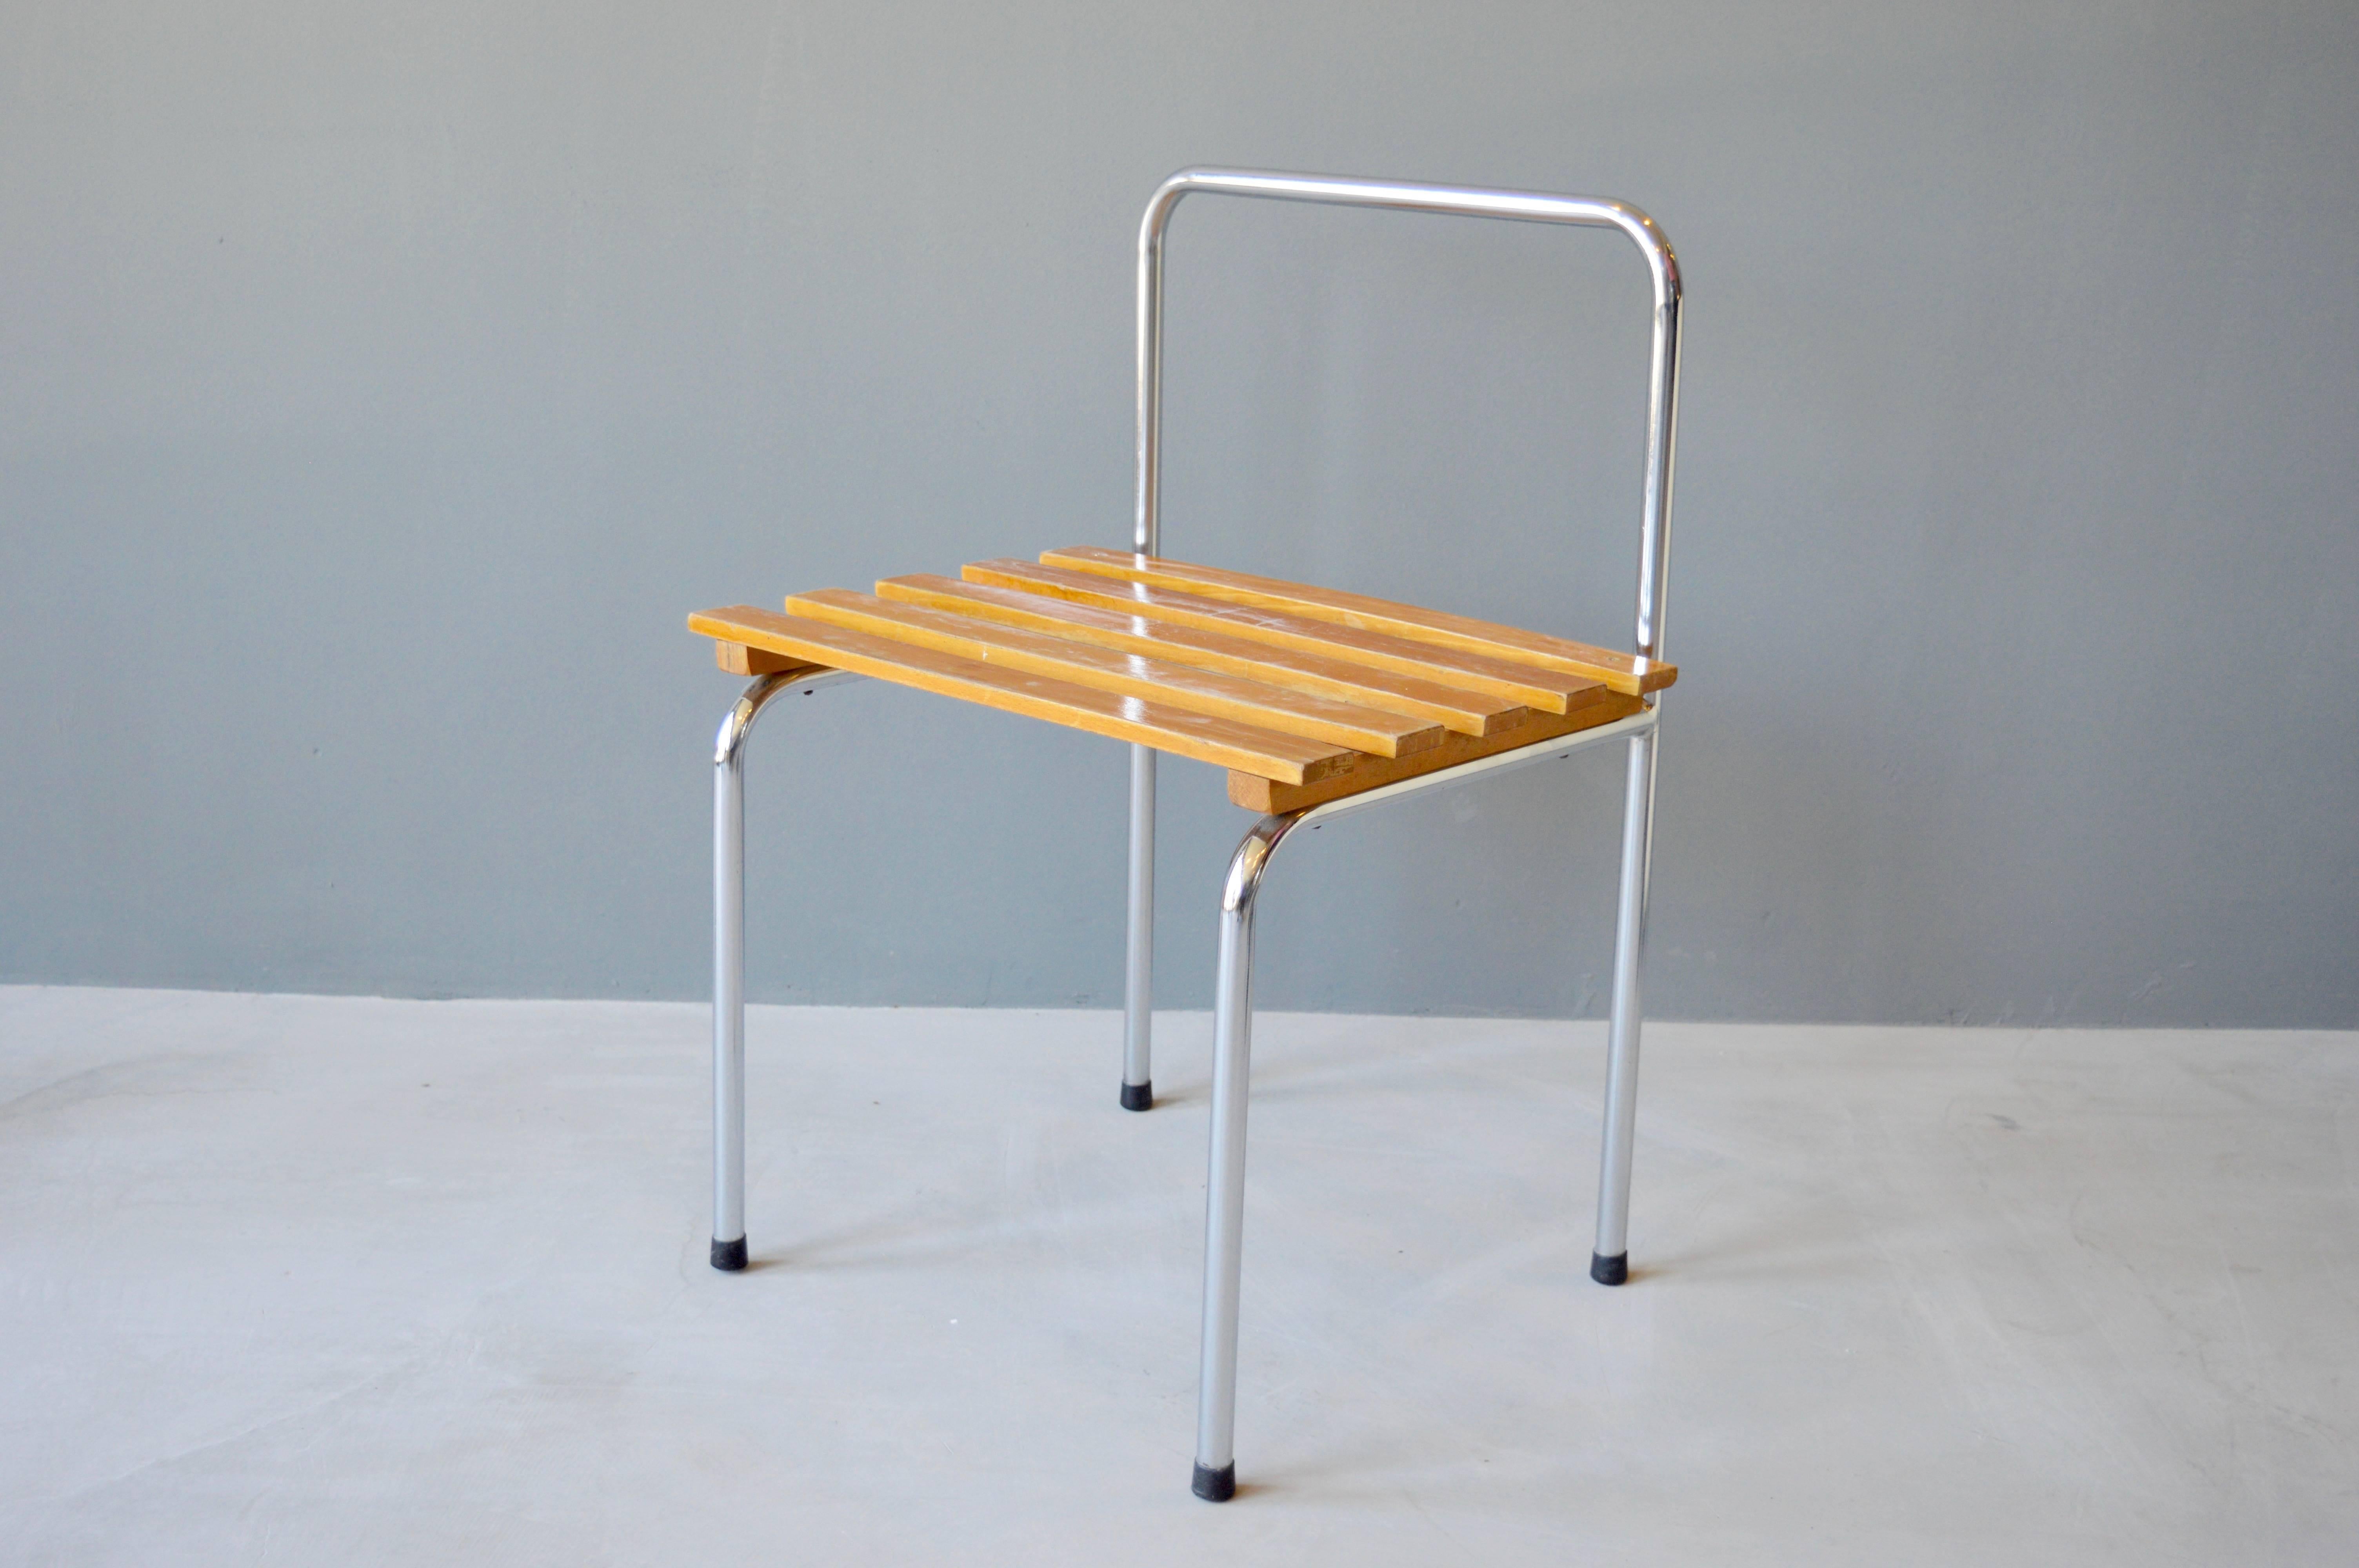 Classic luggage rack or stool by Charlotte Perriand for Les Arcs. Tubular chrome frame with pine slats. Wood in original vintage condition. Could also be used as a side table. Fantastic piece of design. 8 available. Varying degrees of patina. Priced